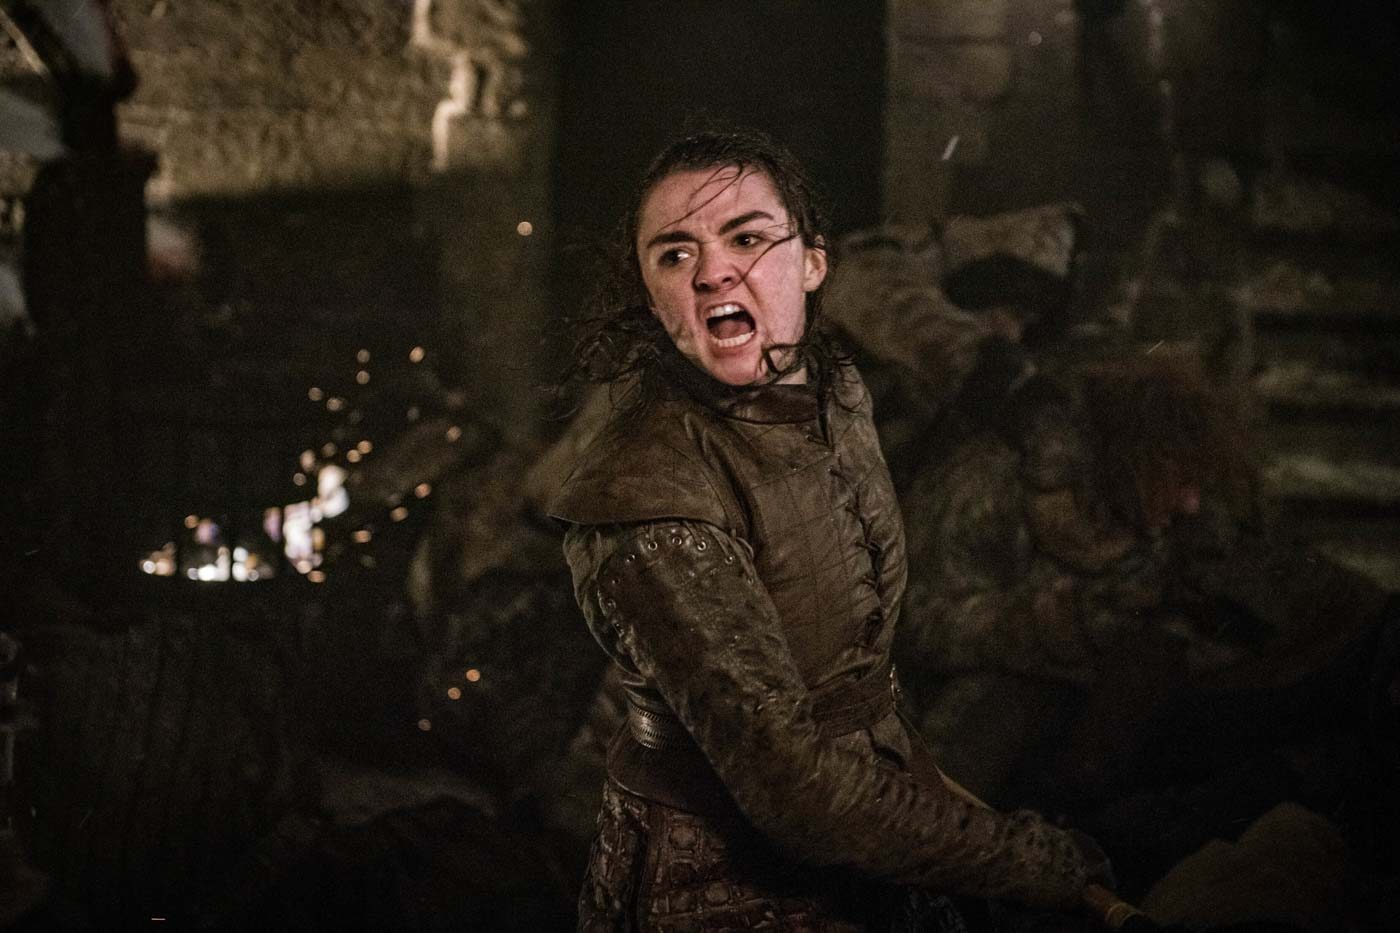 ‘Game of Thrones’ Season 8, Episode 3 highlights: Who survived the Battle of Winterfell?